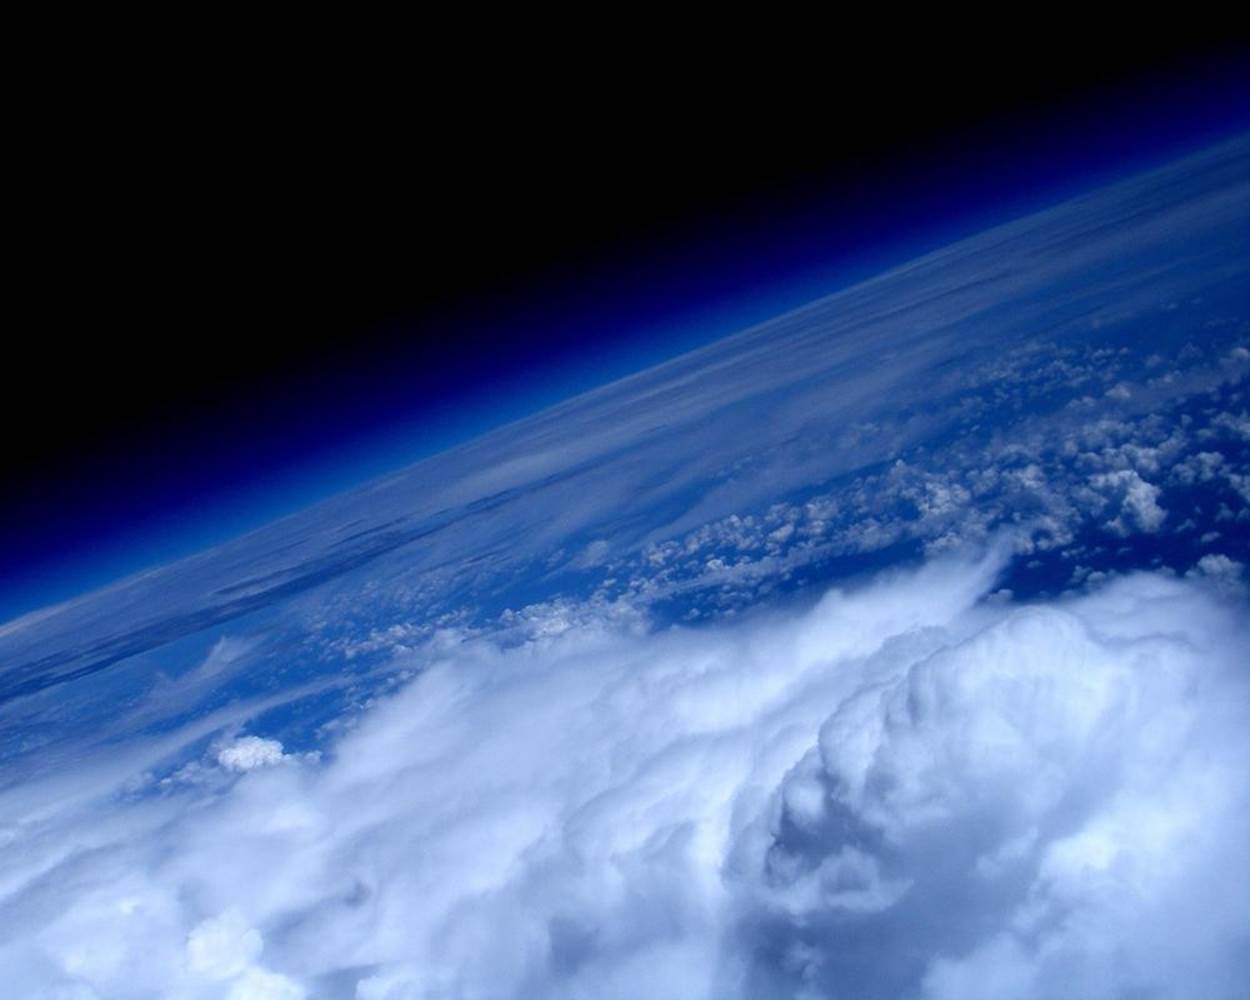 The edge of the earth, as captured from a Raspberry Pi-powered payload (courtesy of Rodney Radford)